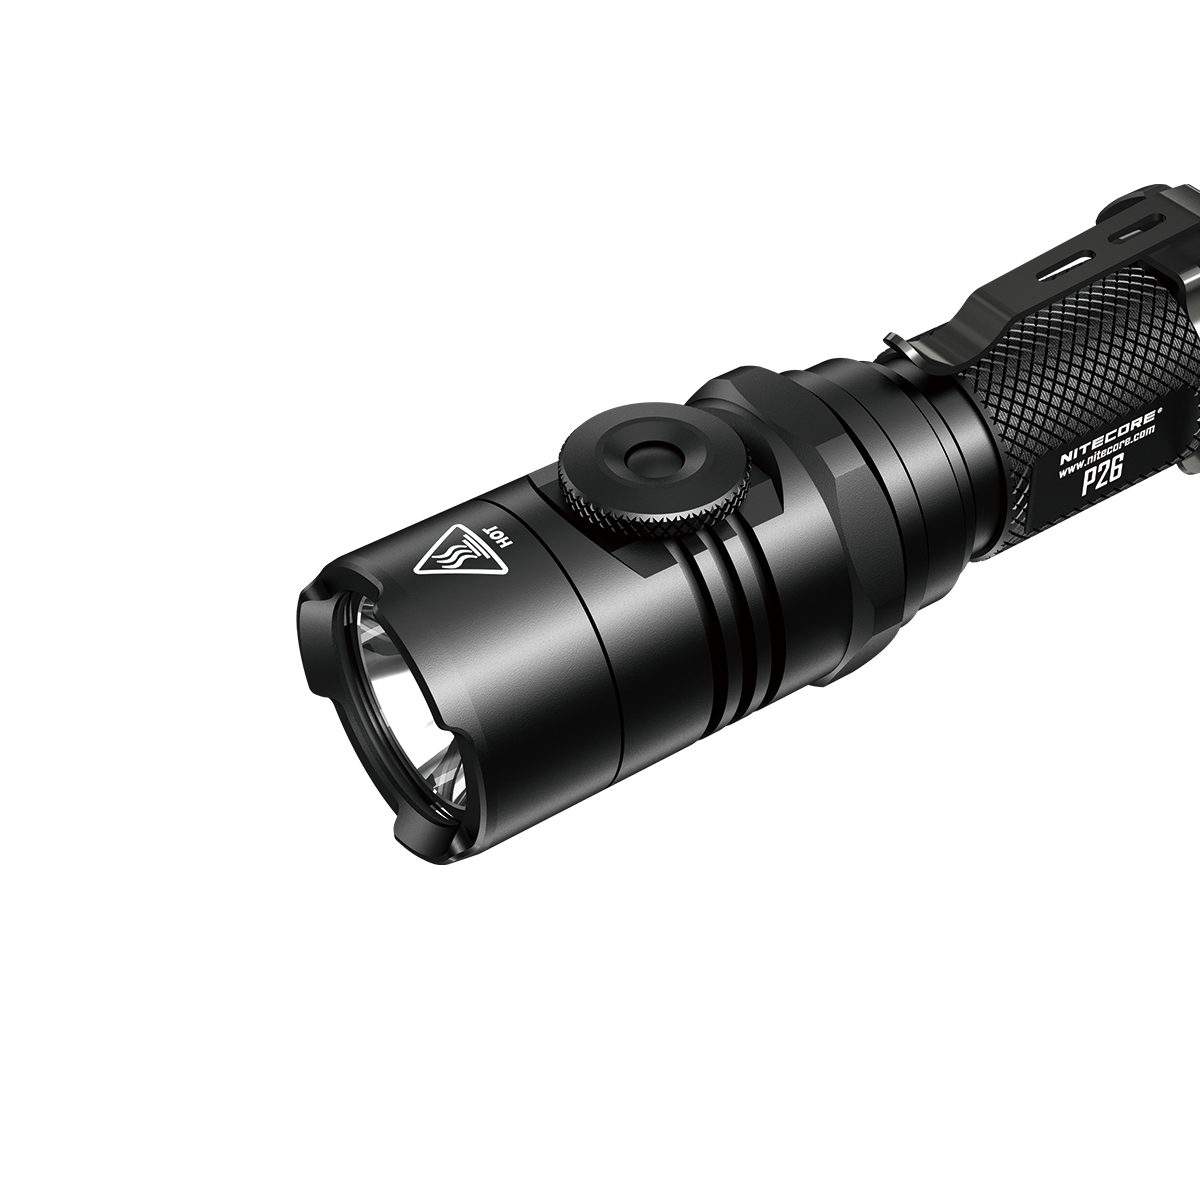 Nitecore P26 Water Resistant Tactical Police Military LED Flashlight Light 